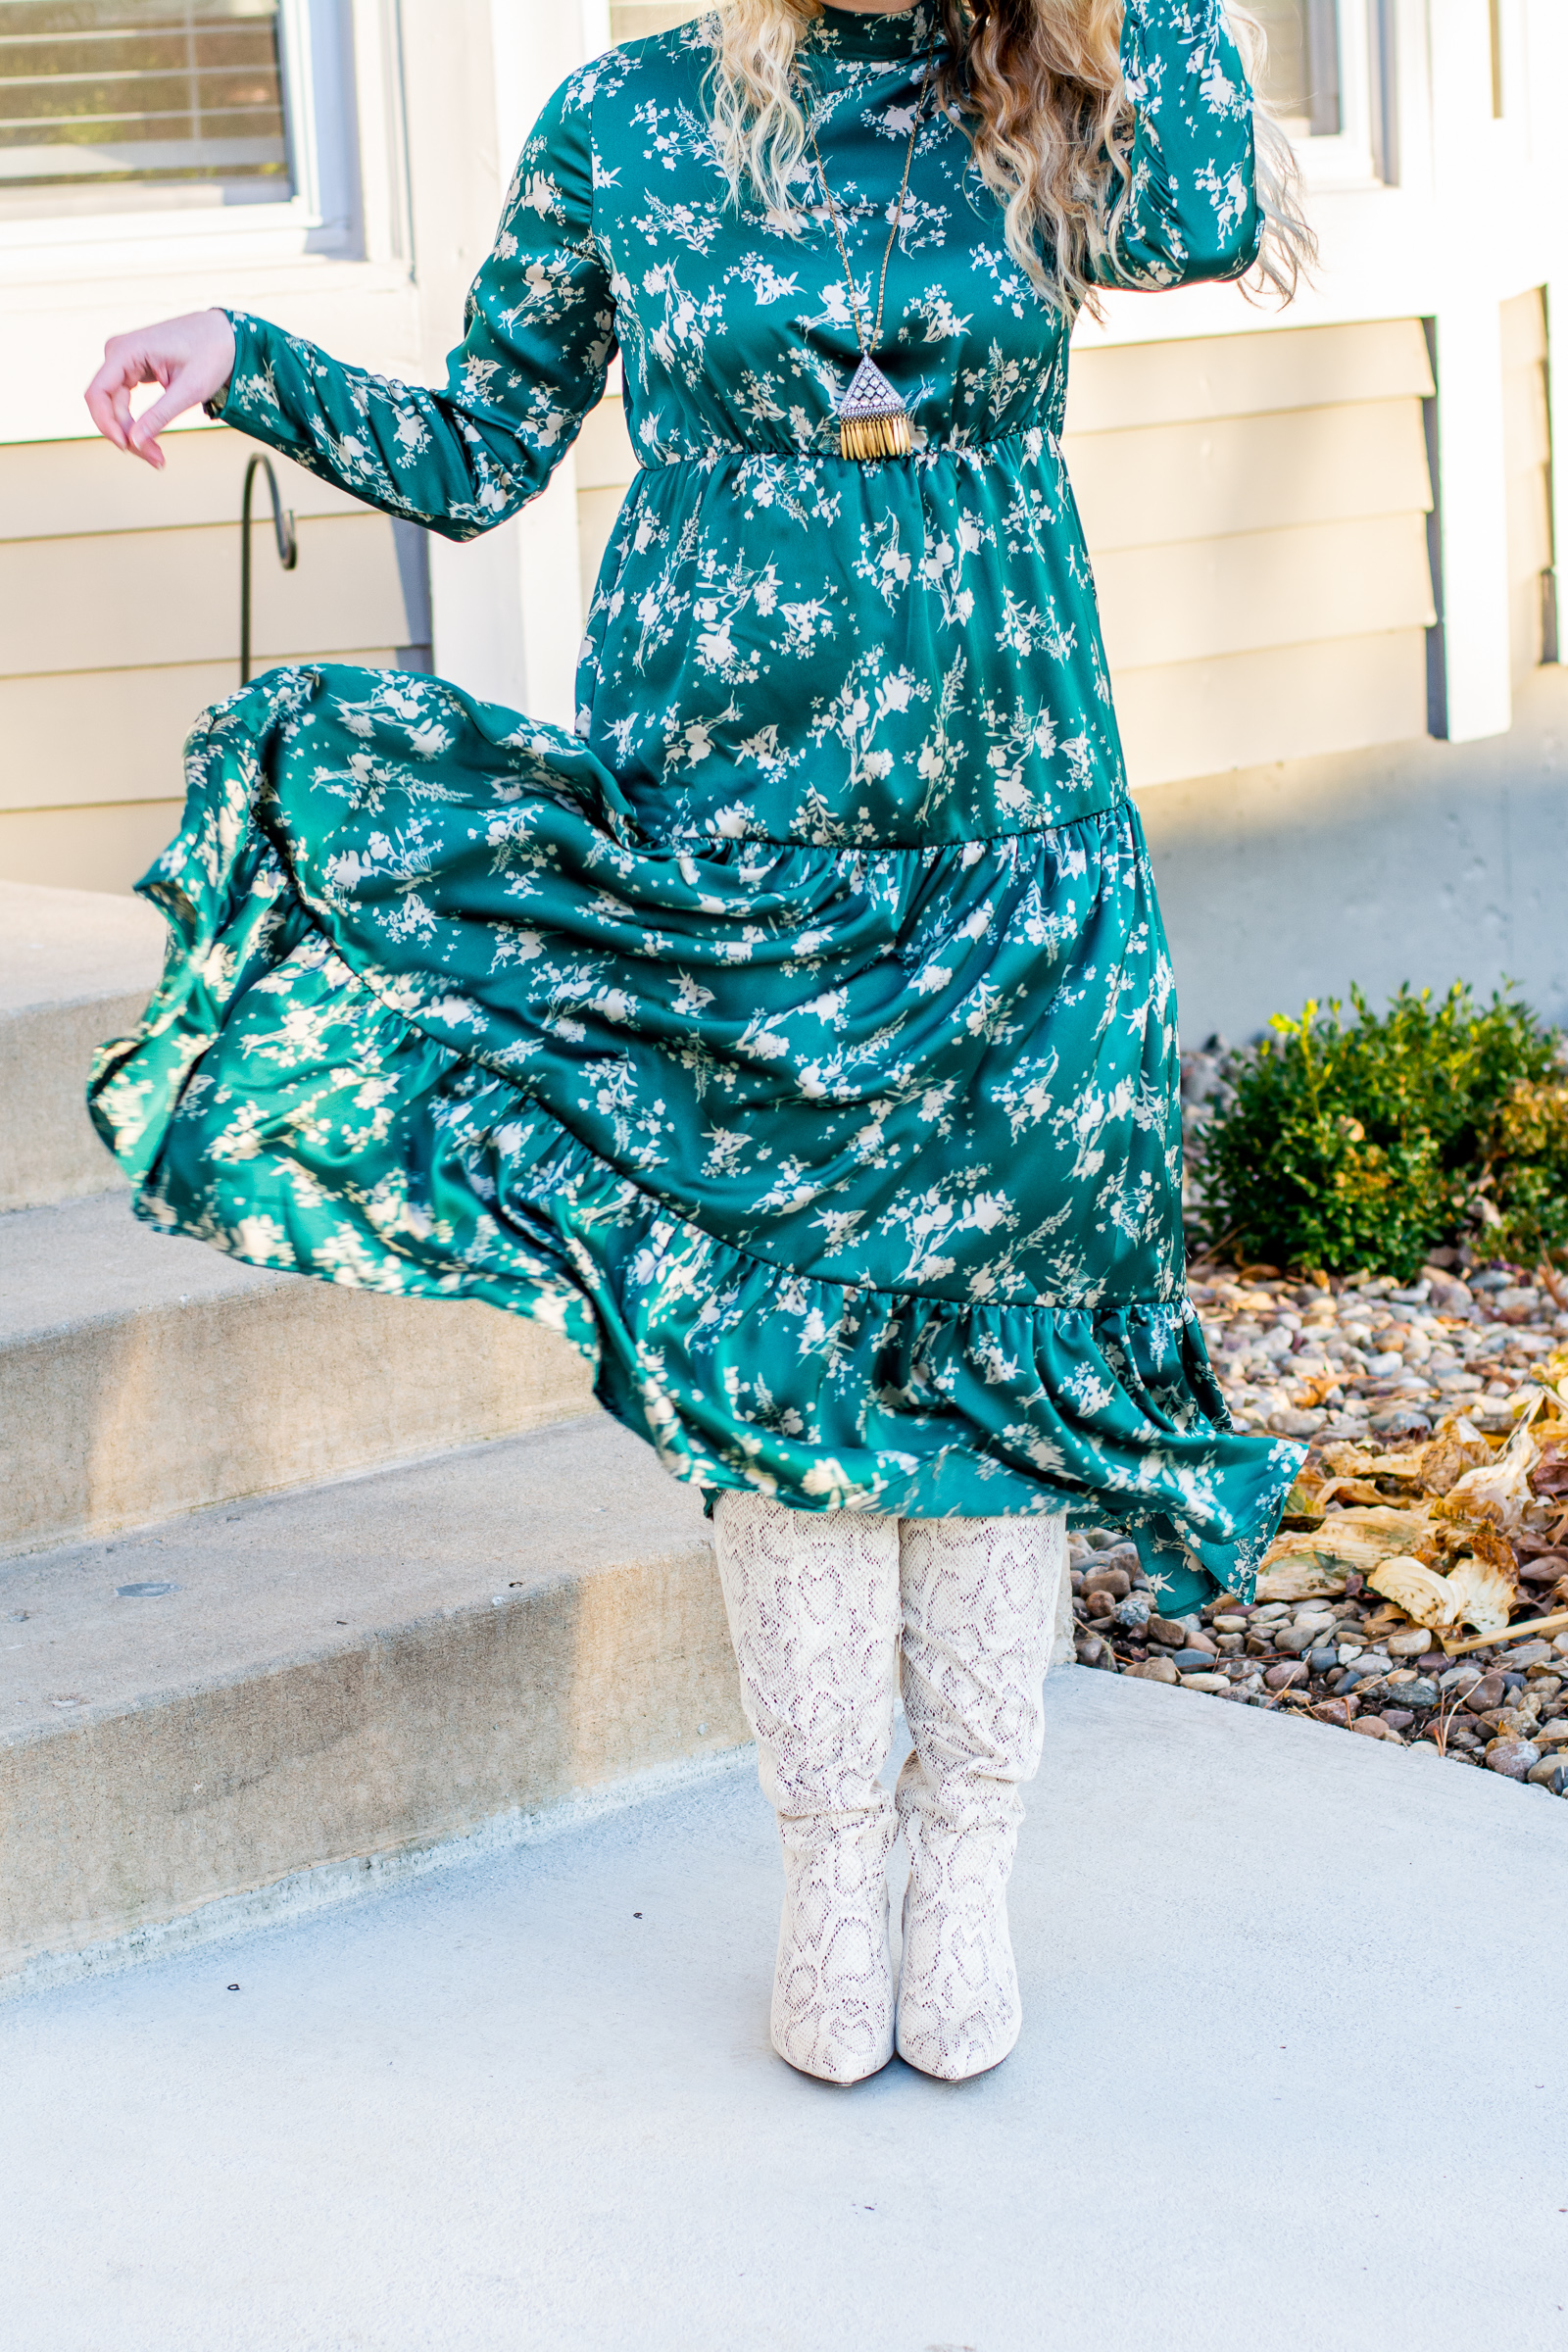 Holiday Outfit Idea: Green Satin Prairie Dress + Snakeskin Boots. | LSR